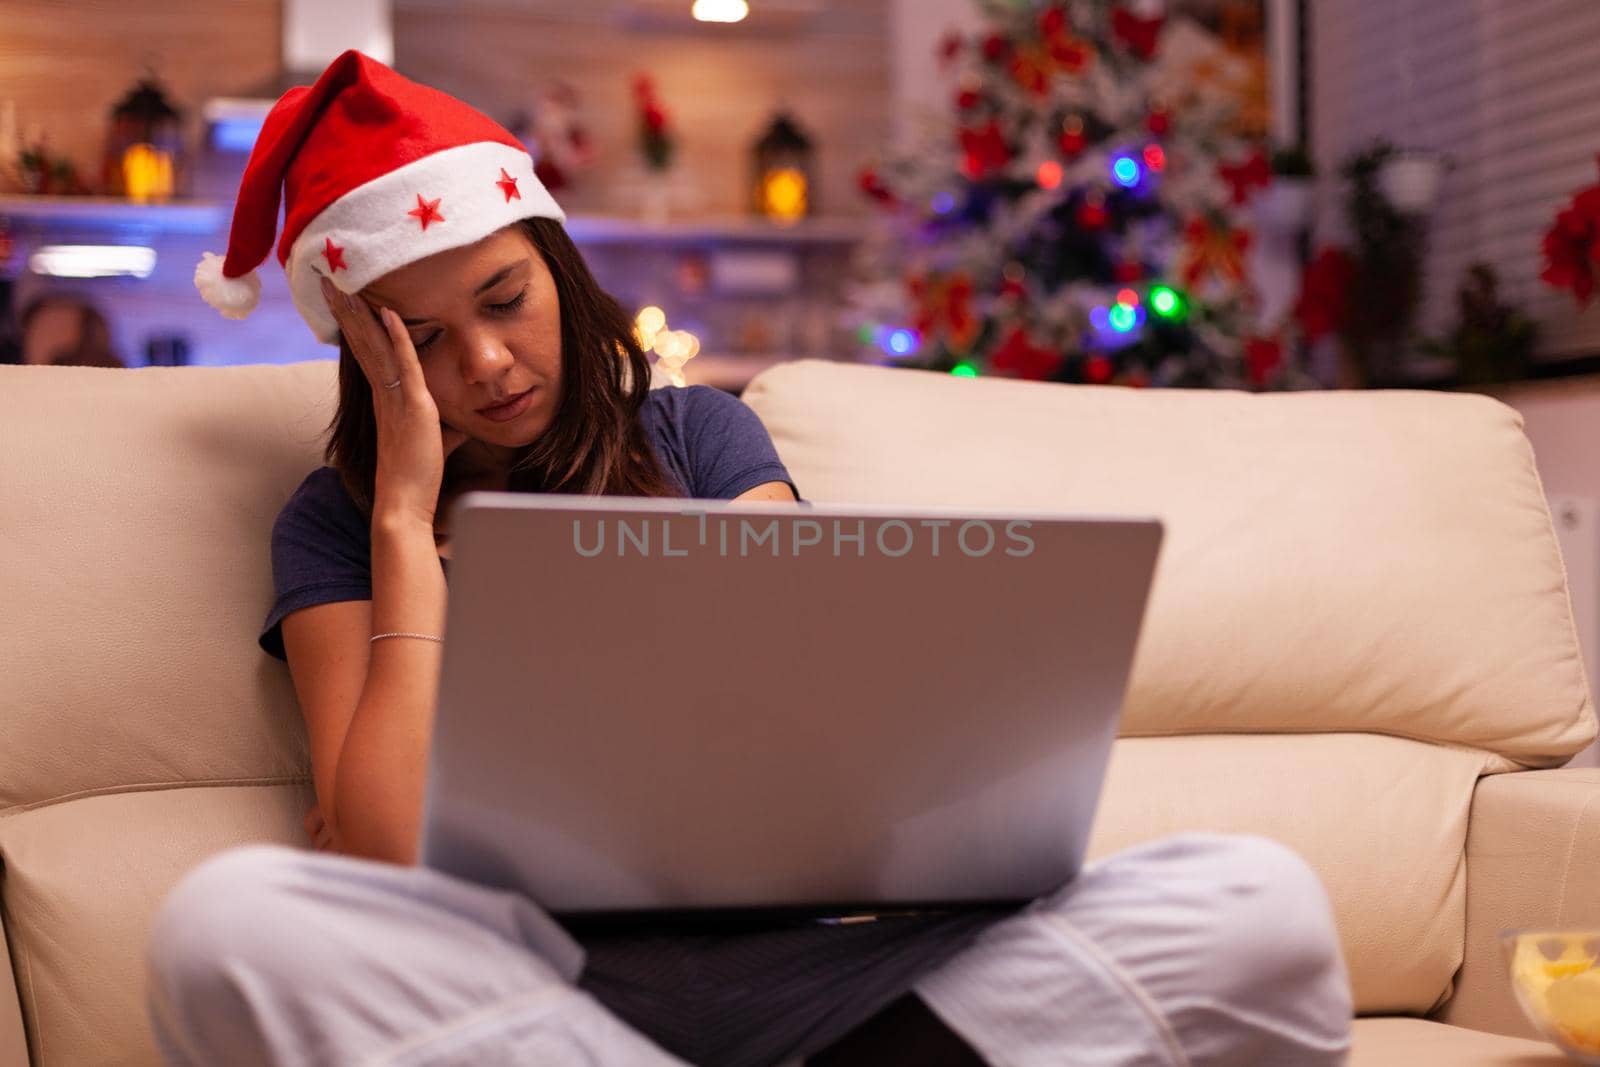 Tired exhausted woman sleeping on sofa in xmas decorated kitchen while searching business email on laptop computer. Caucasian female celebrating christmas holiday enjoying winter season